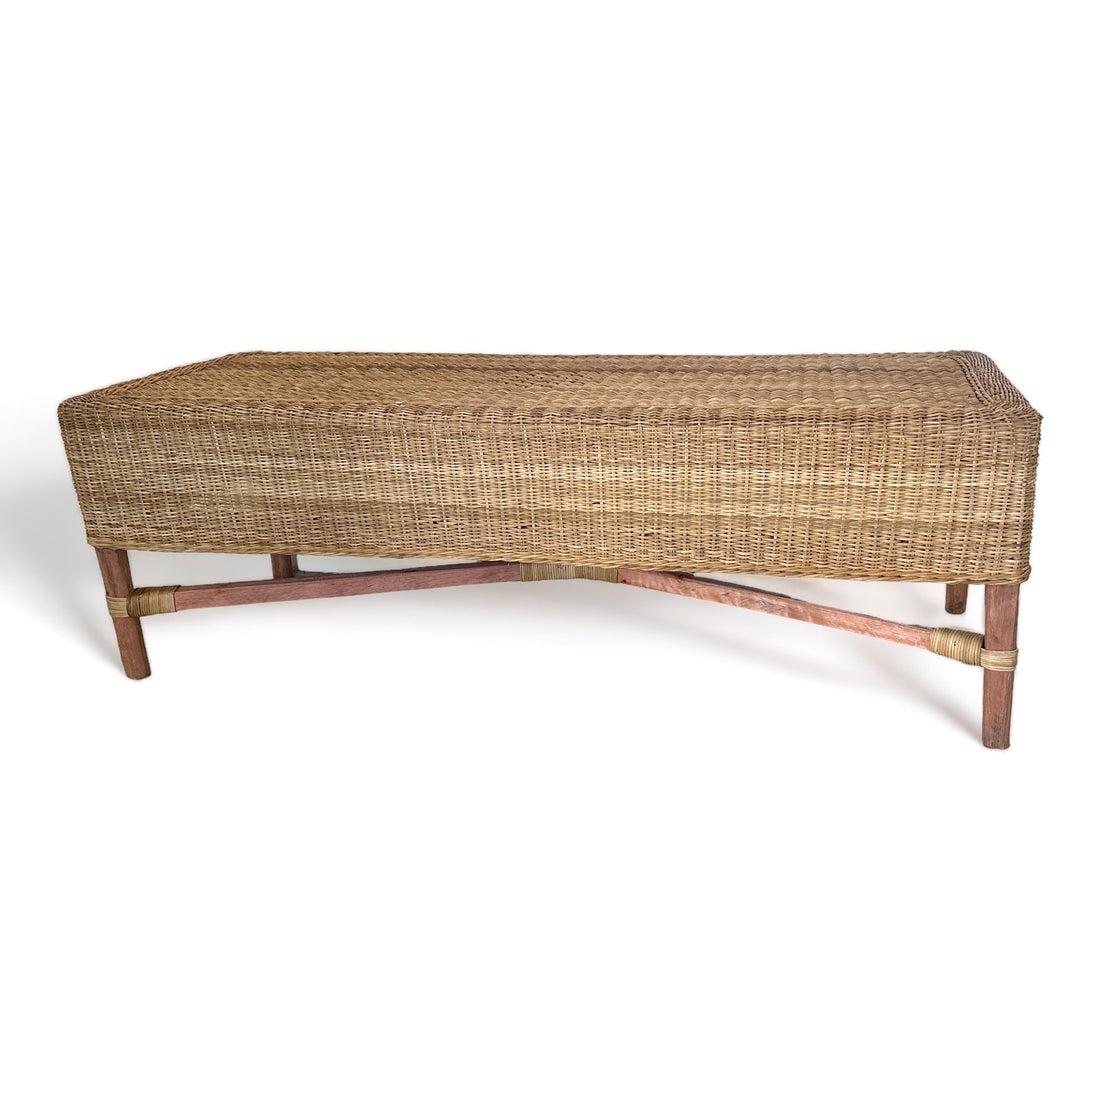 Malawi Cane Bench  - Solid Weave